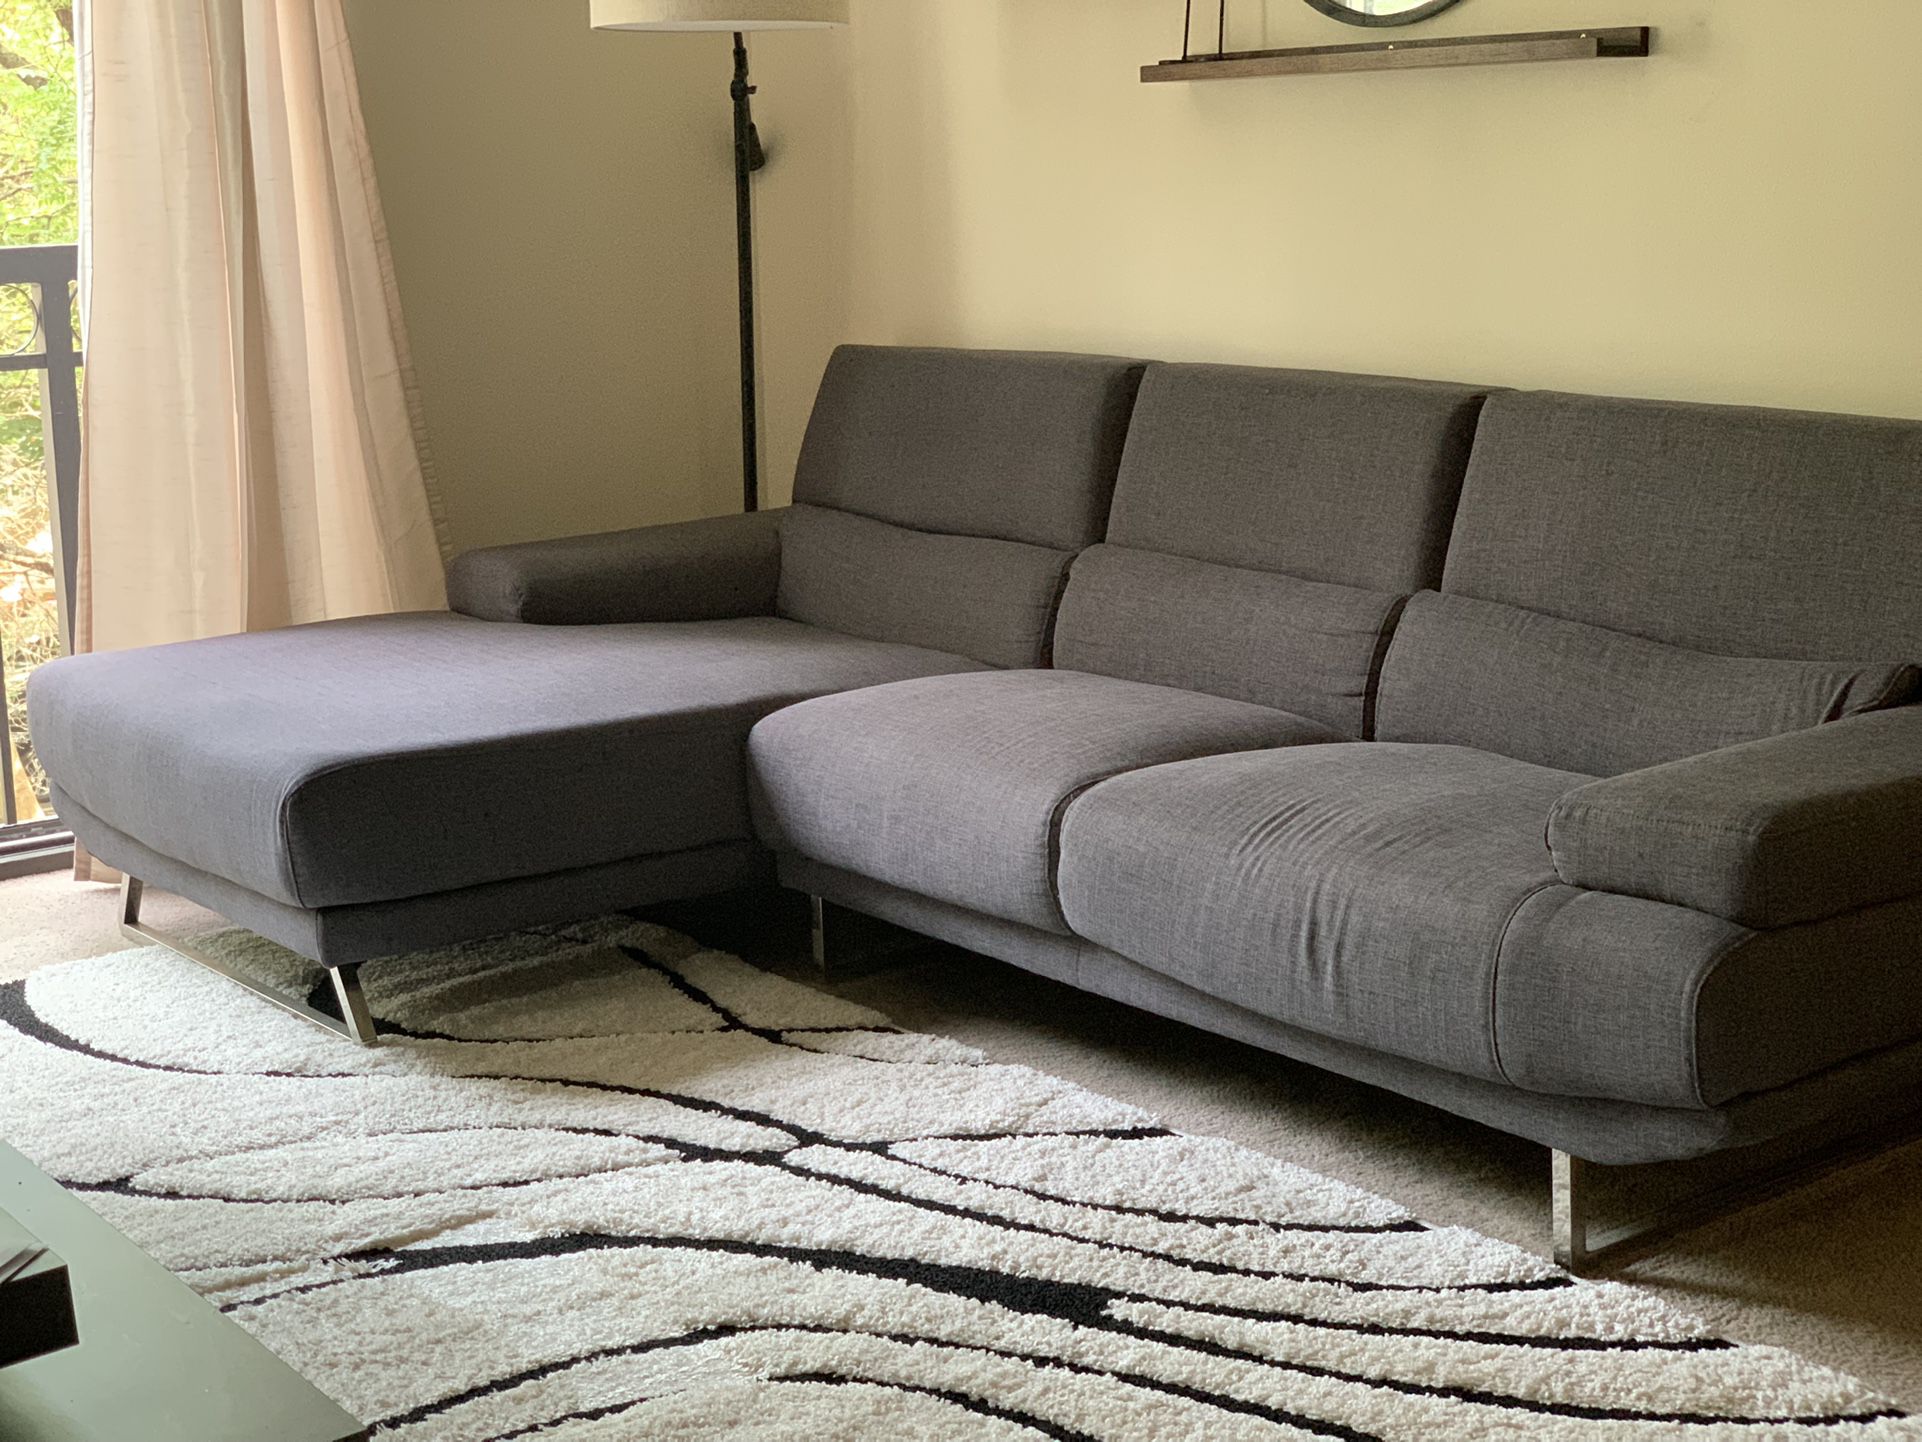 Sectional Sofa With Chaise (from Wayfair)